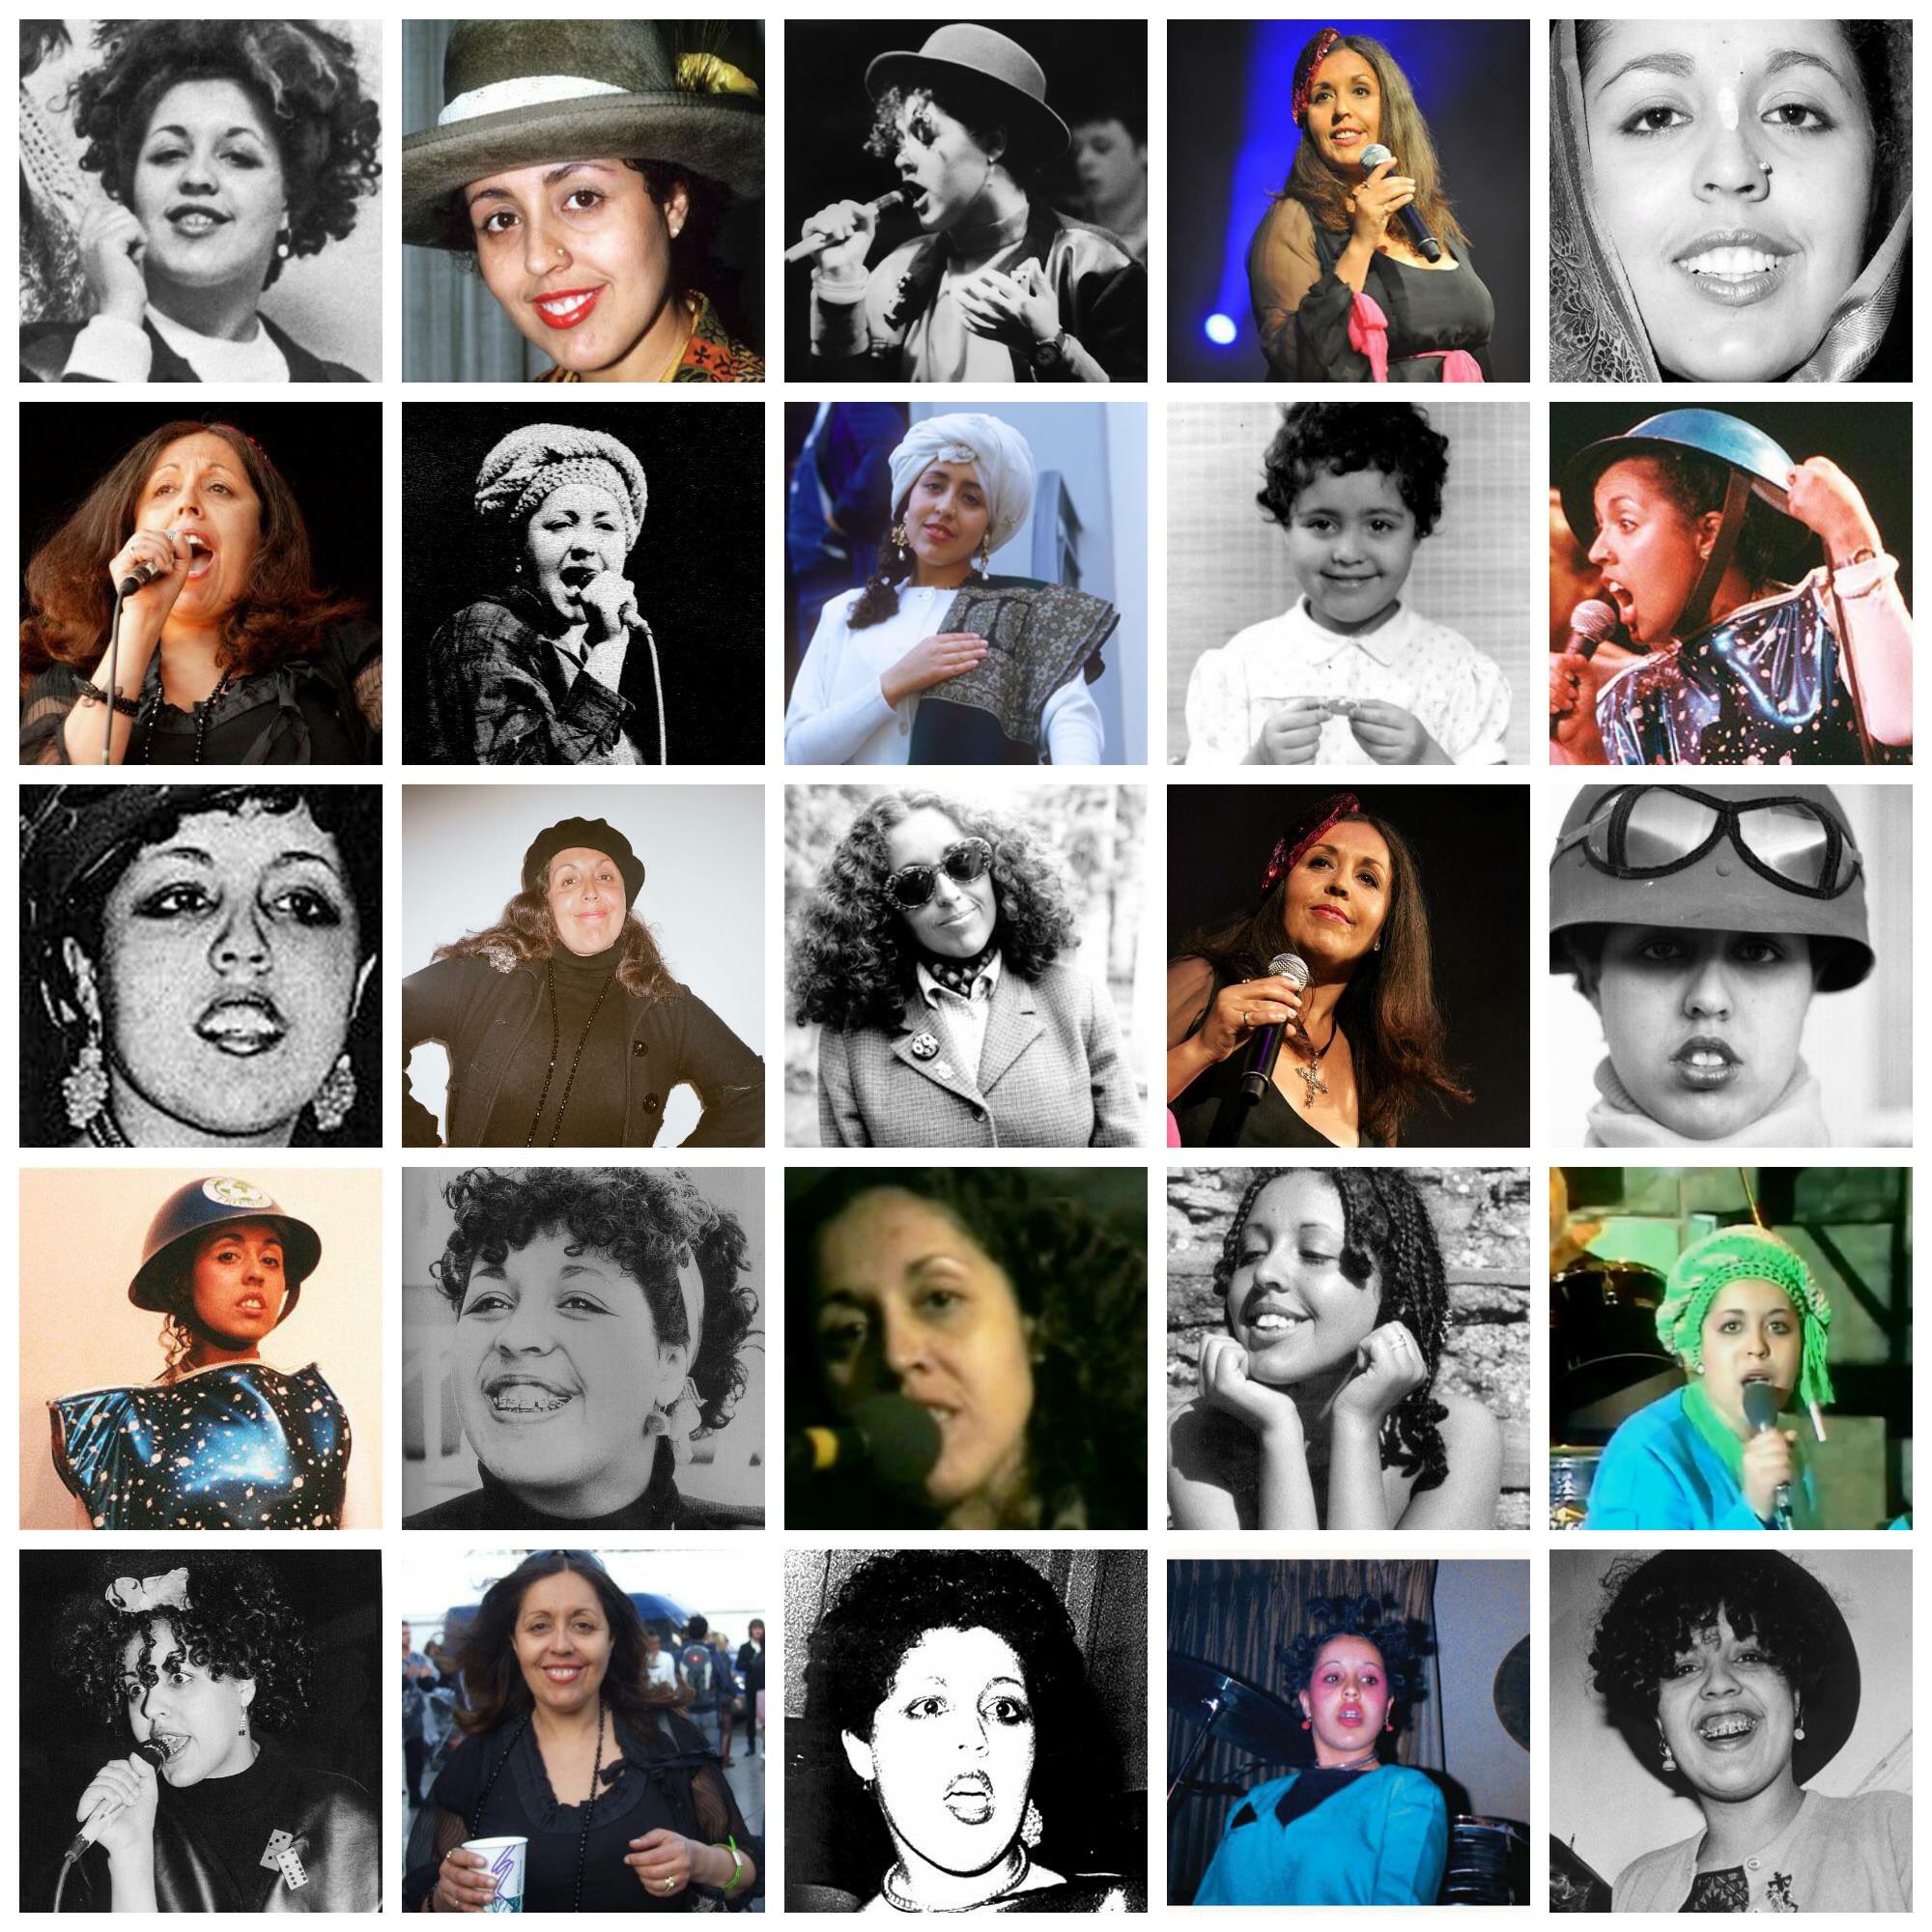 Happy birthday to Poly Styrene. Looking forward to seeing the film about her next year. 